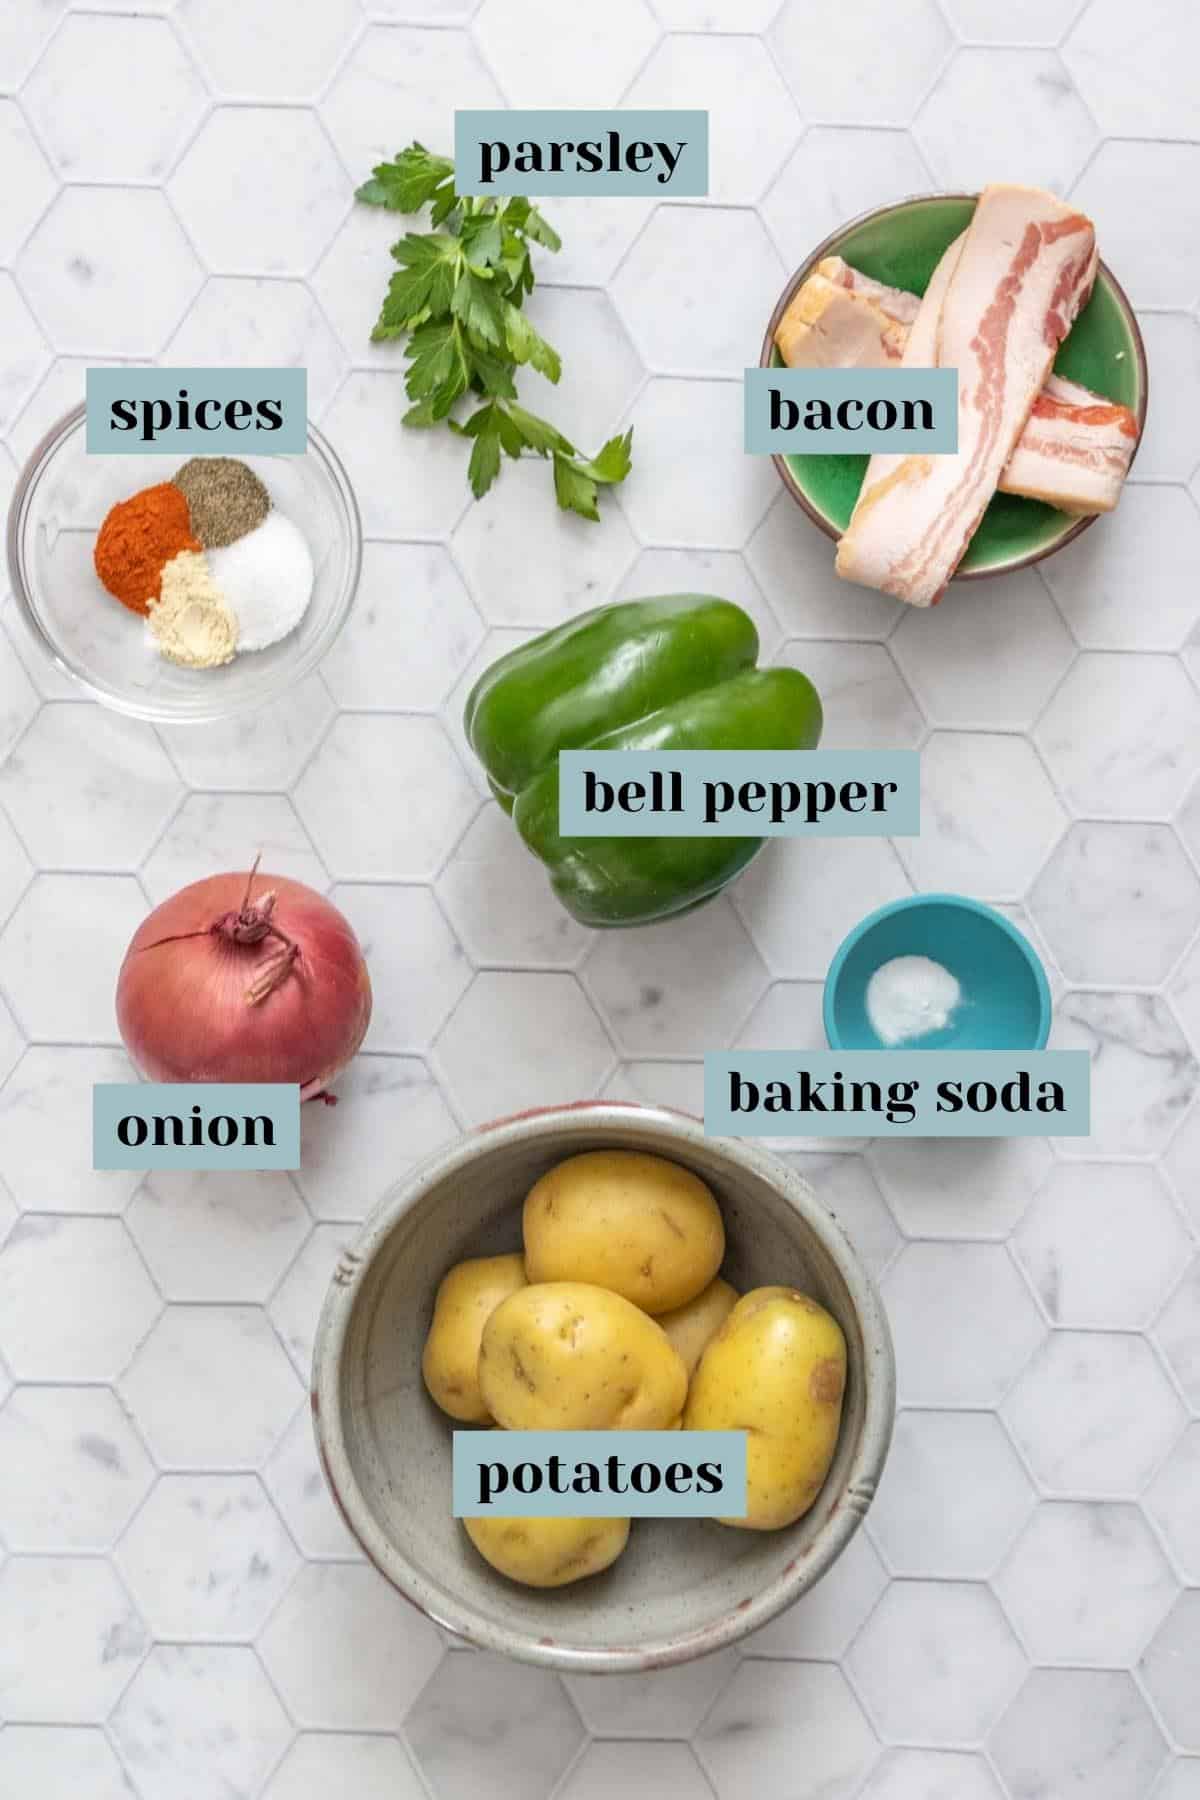 Ingredients for breakfast potatoes on a tile surface with labels.